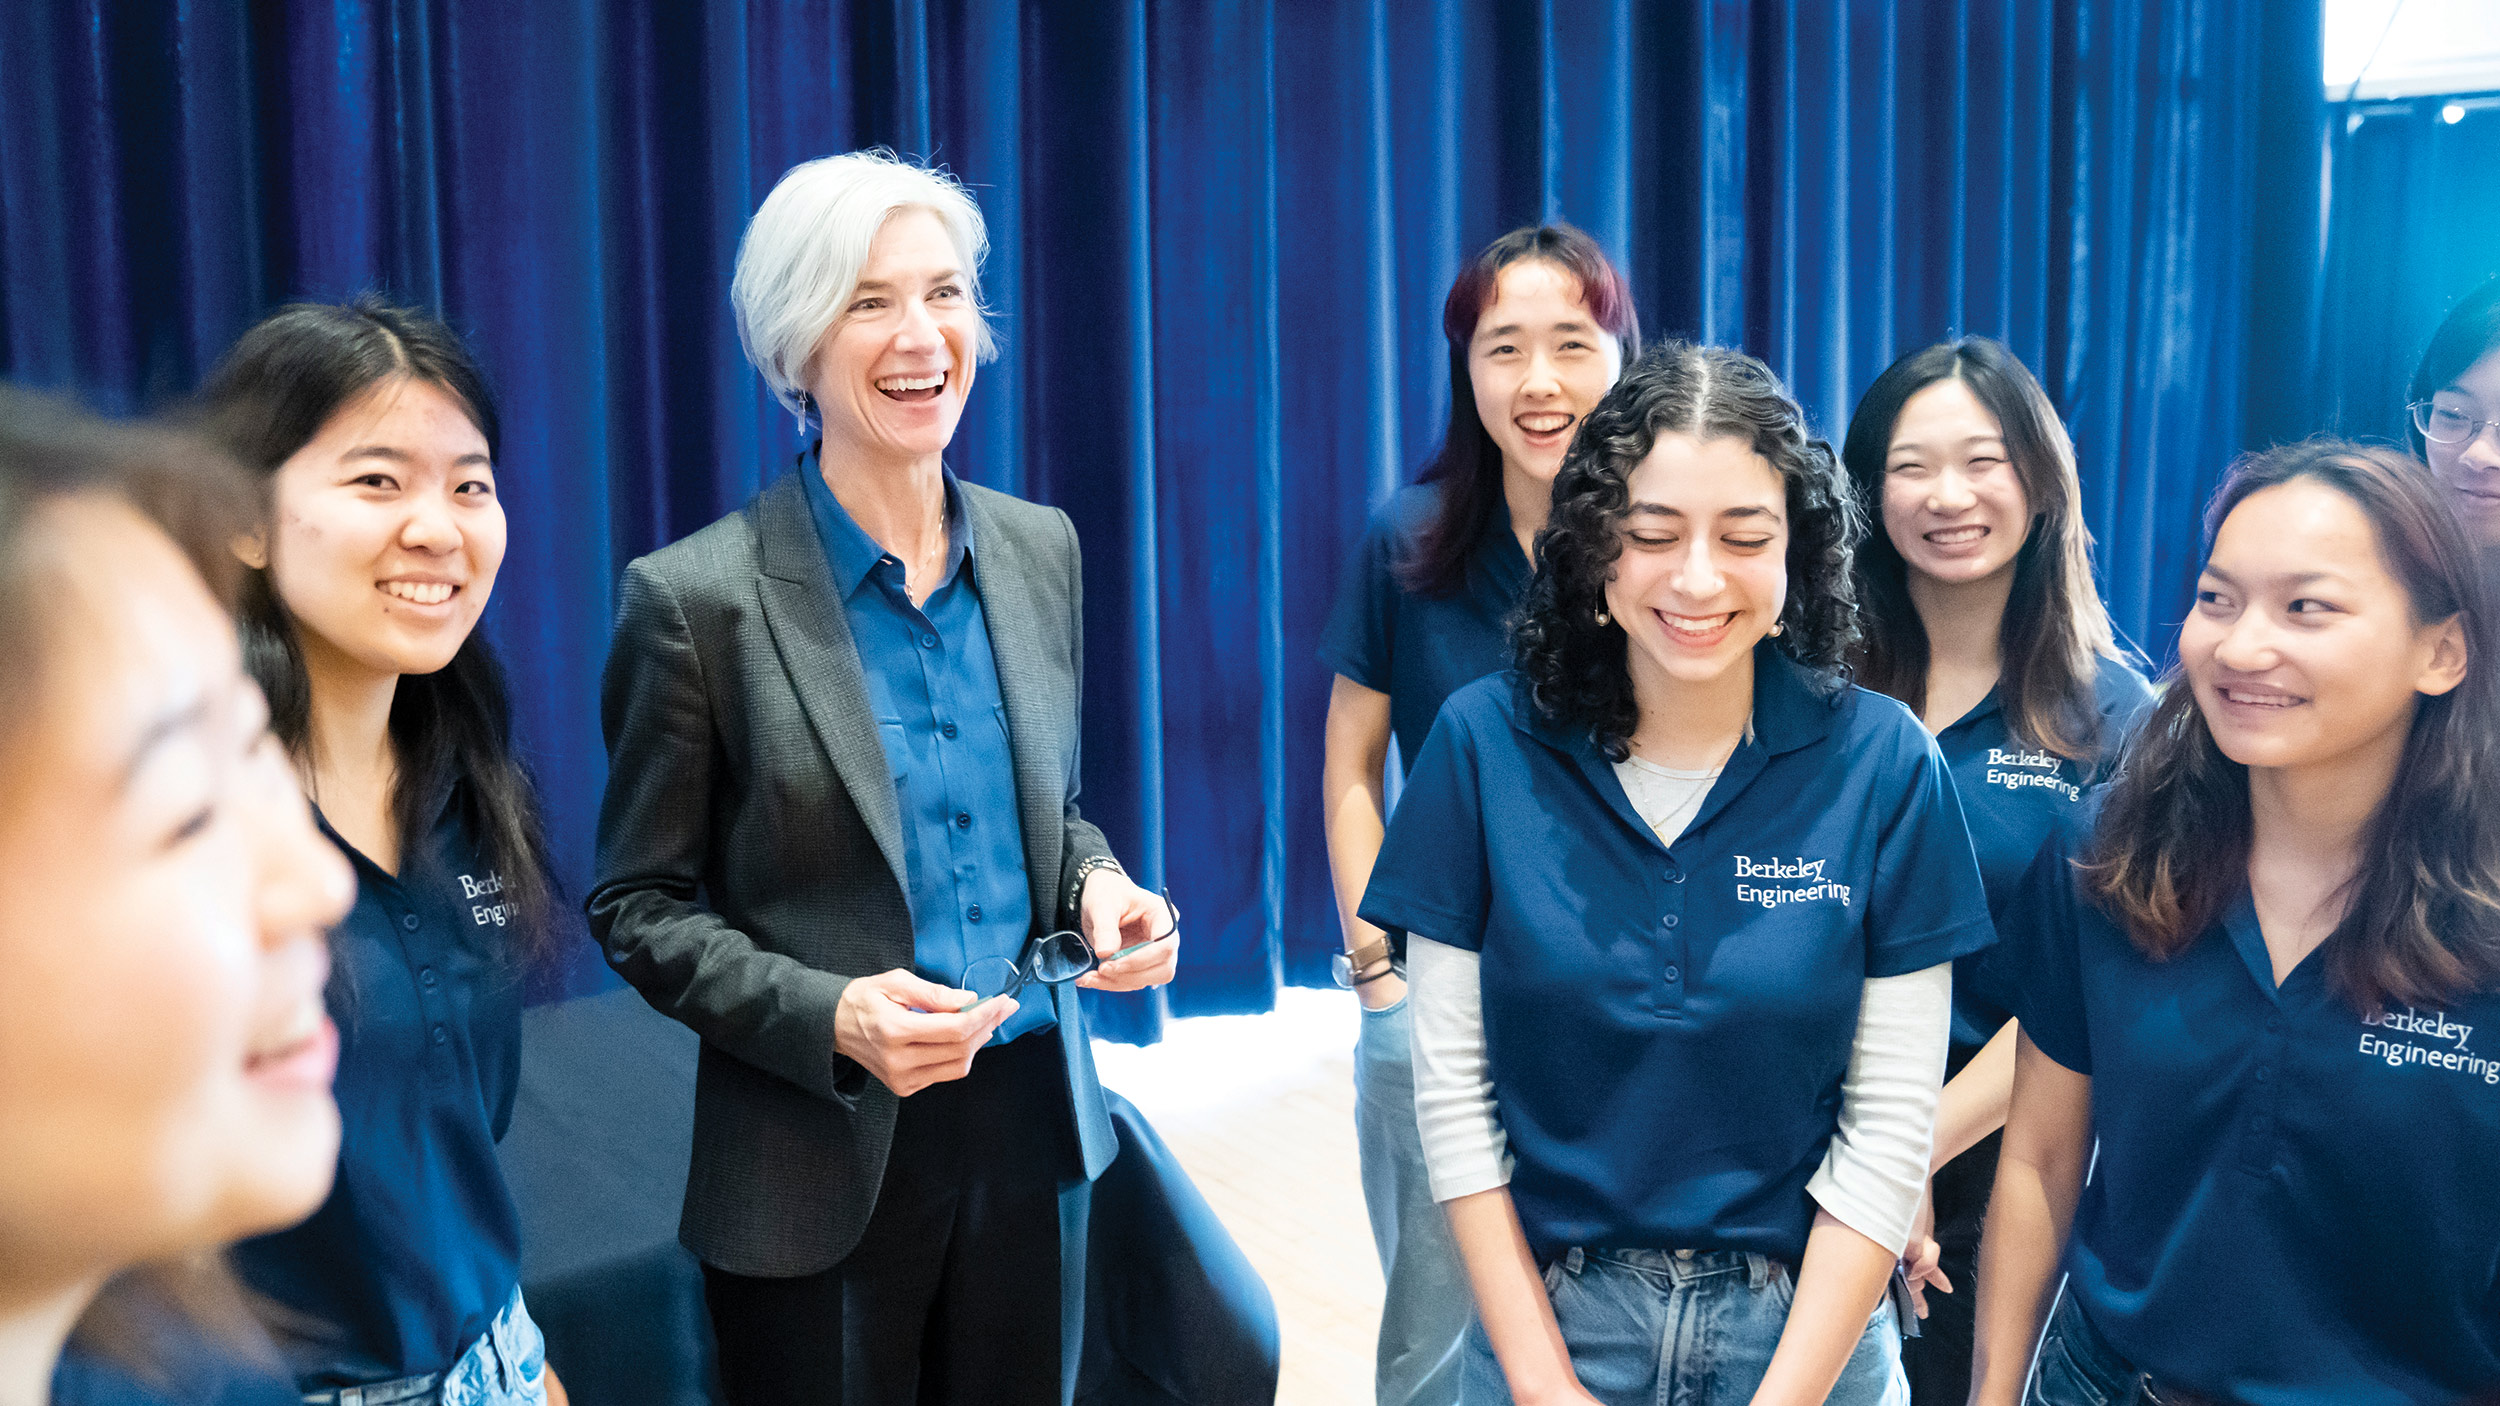 Nobel-prize winning professor Jennifer Doudna meets with Society of Women Engineers students before the Kuh Distinguished Lecture